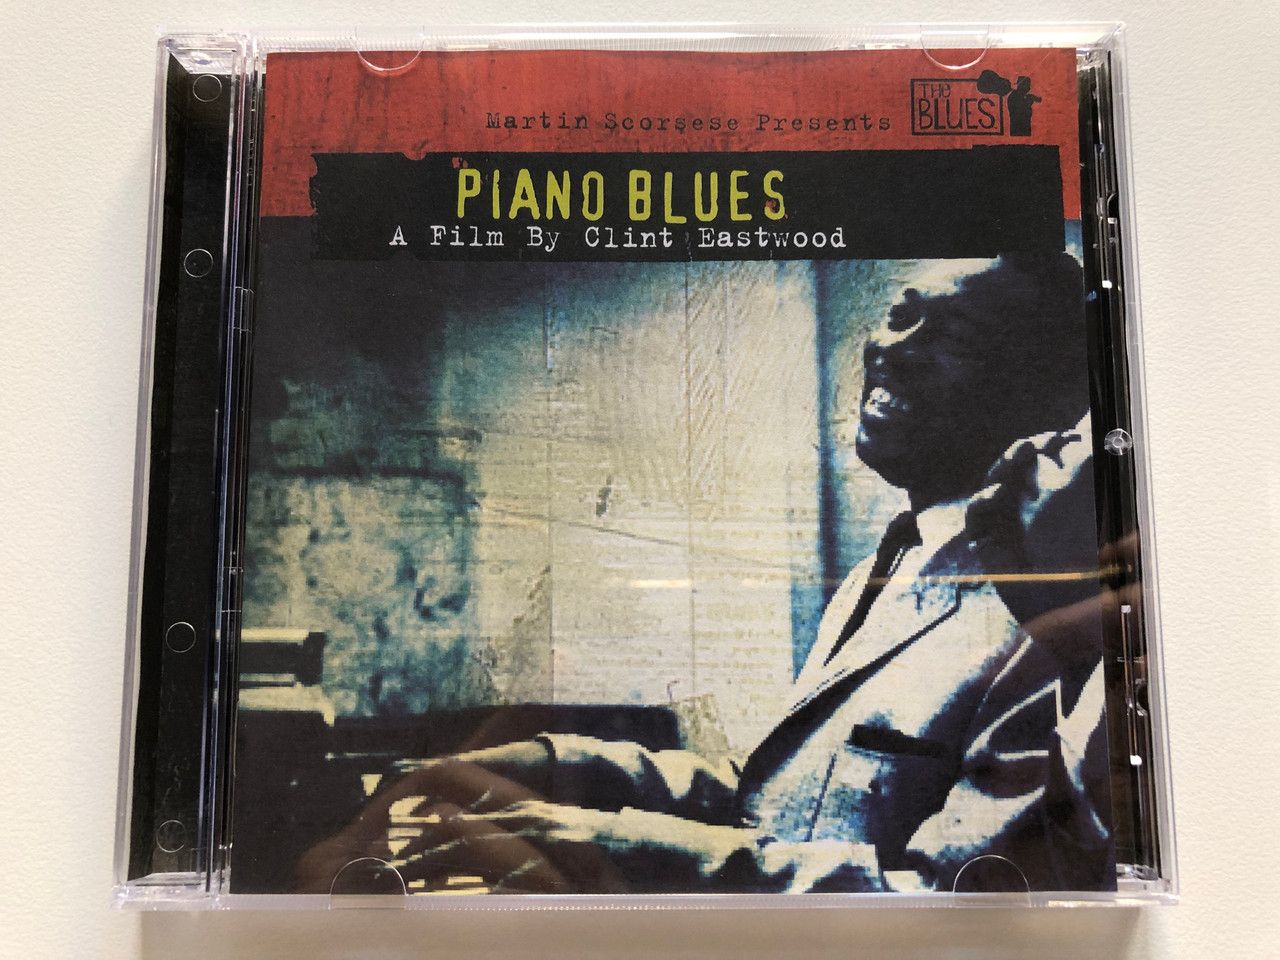 Martin Scorsese Presents The Blues - Piano Blues - A Film By Clint Eastwood  / The Blues / Columbia Audio CD 2003 / 512571 2 - bibleinmylanguage